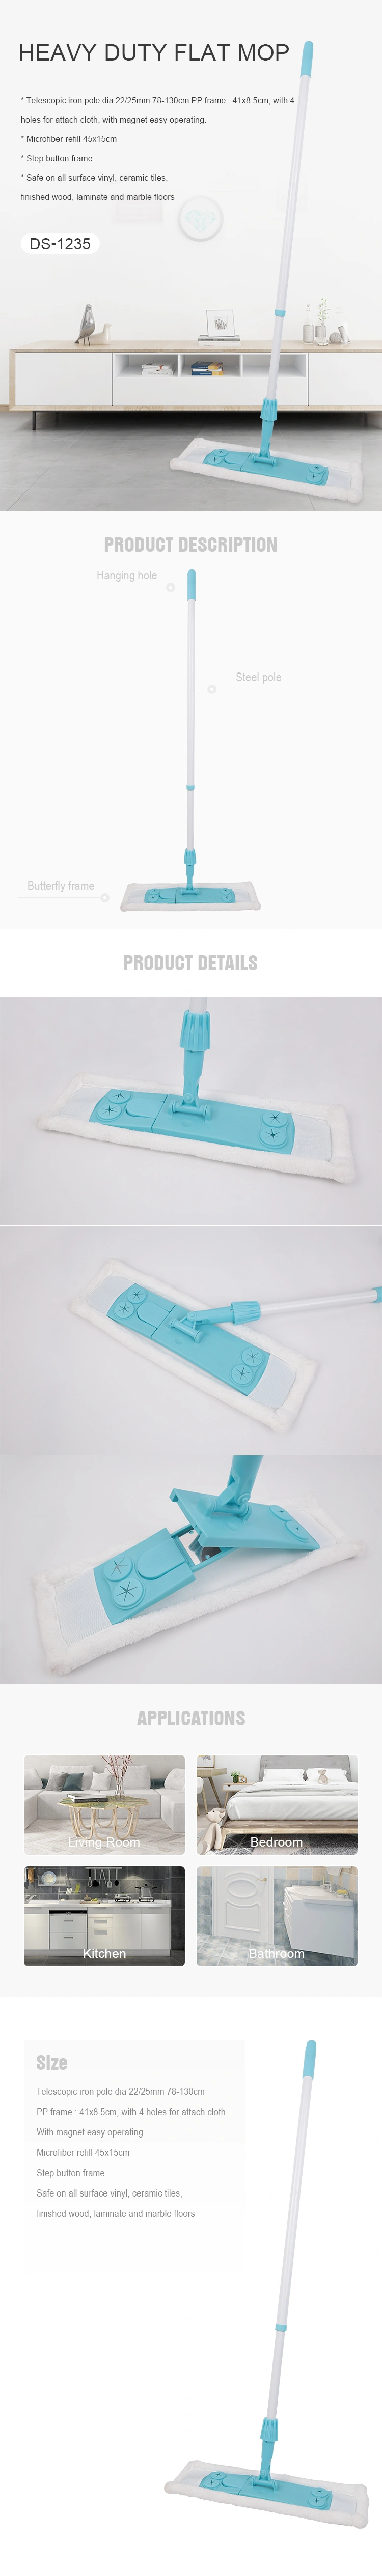 High Quality Hand Free Washing Mop Microfiber Flat Mop for Home Floor Cleaning